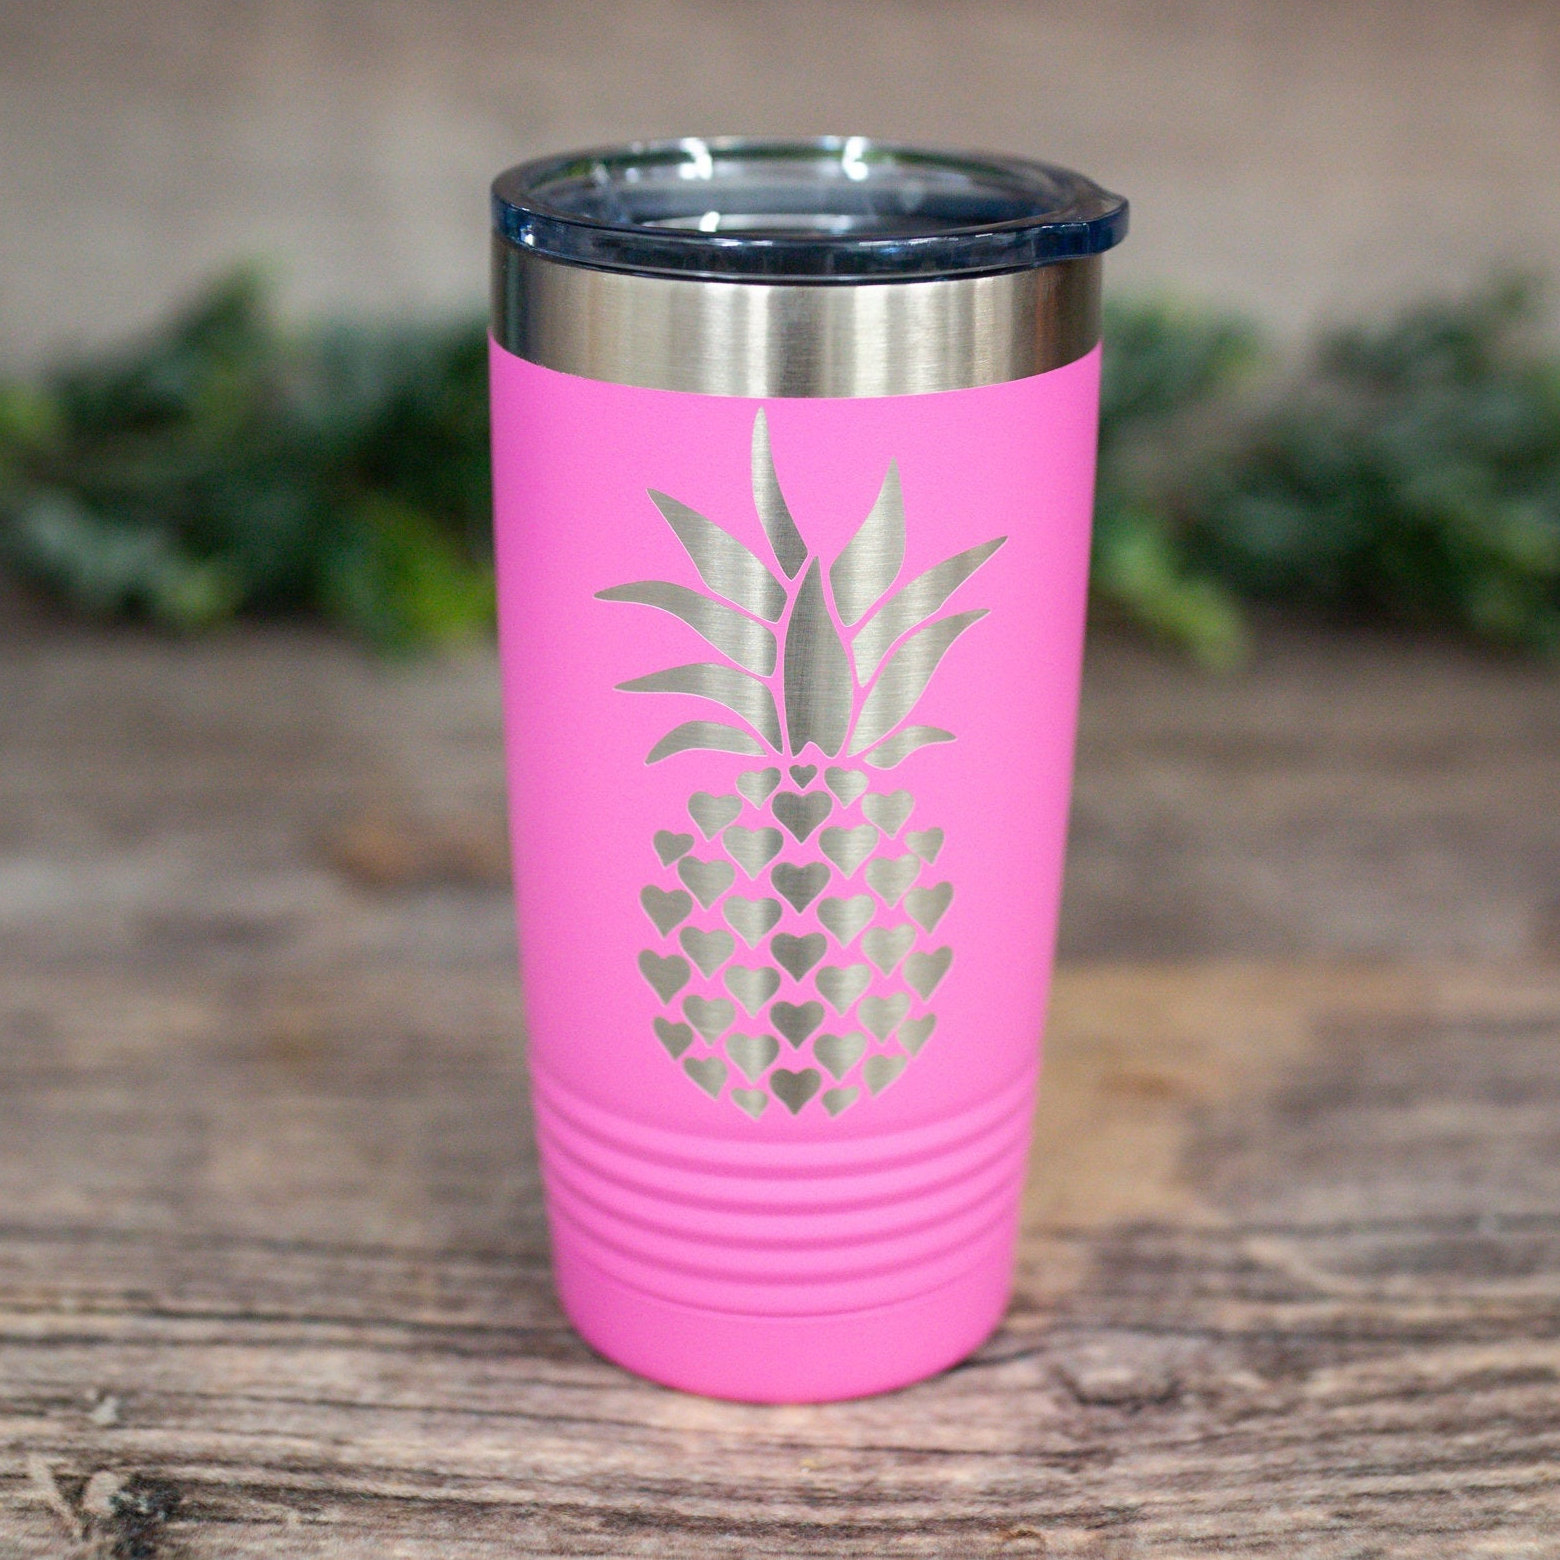 https://3cetching.com/wp-content/uploads/2021/07/heart-pineapple-engraved-stainless-steel-pineapple-tumbler-insulated-pineapple-travel-mug-pineapple-lovers-mug-60f7385a.jpg